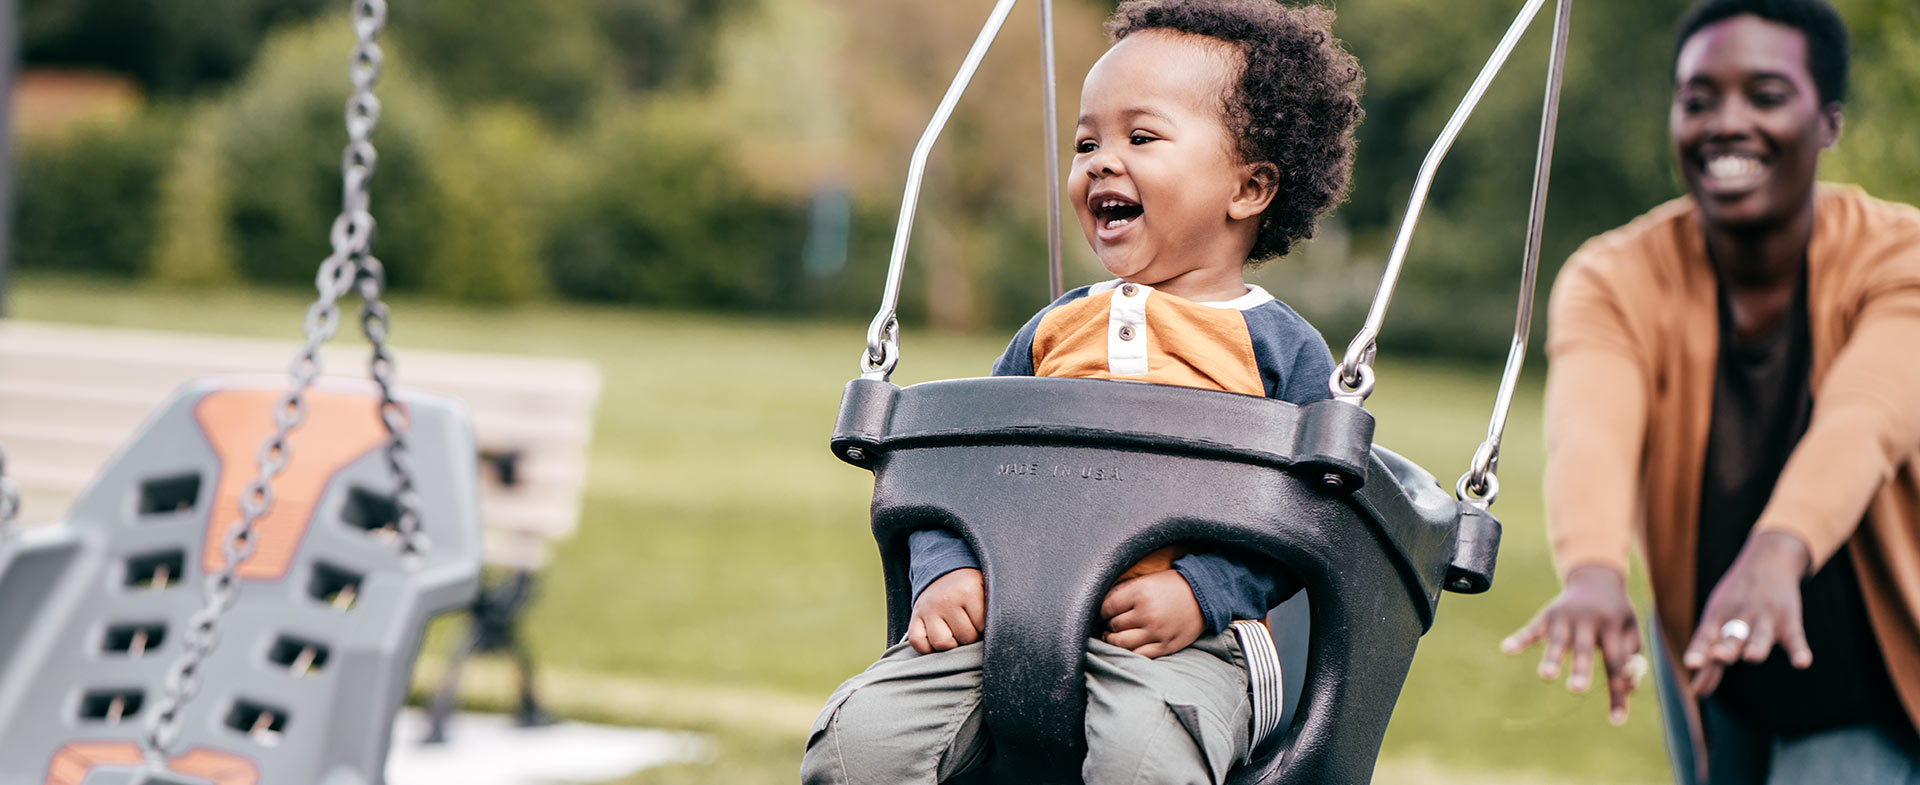 mother pushing child on swings